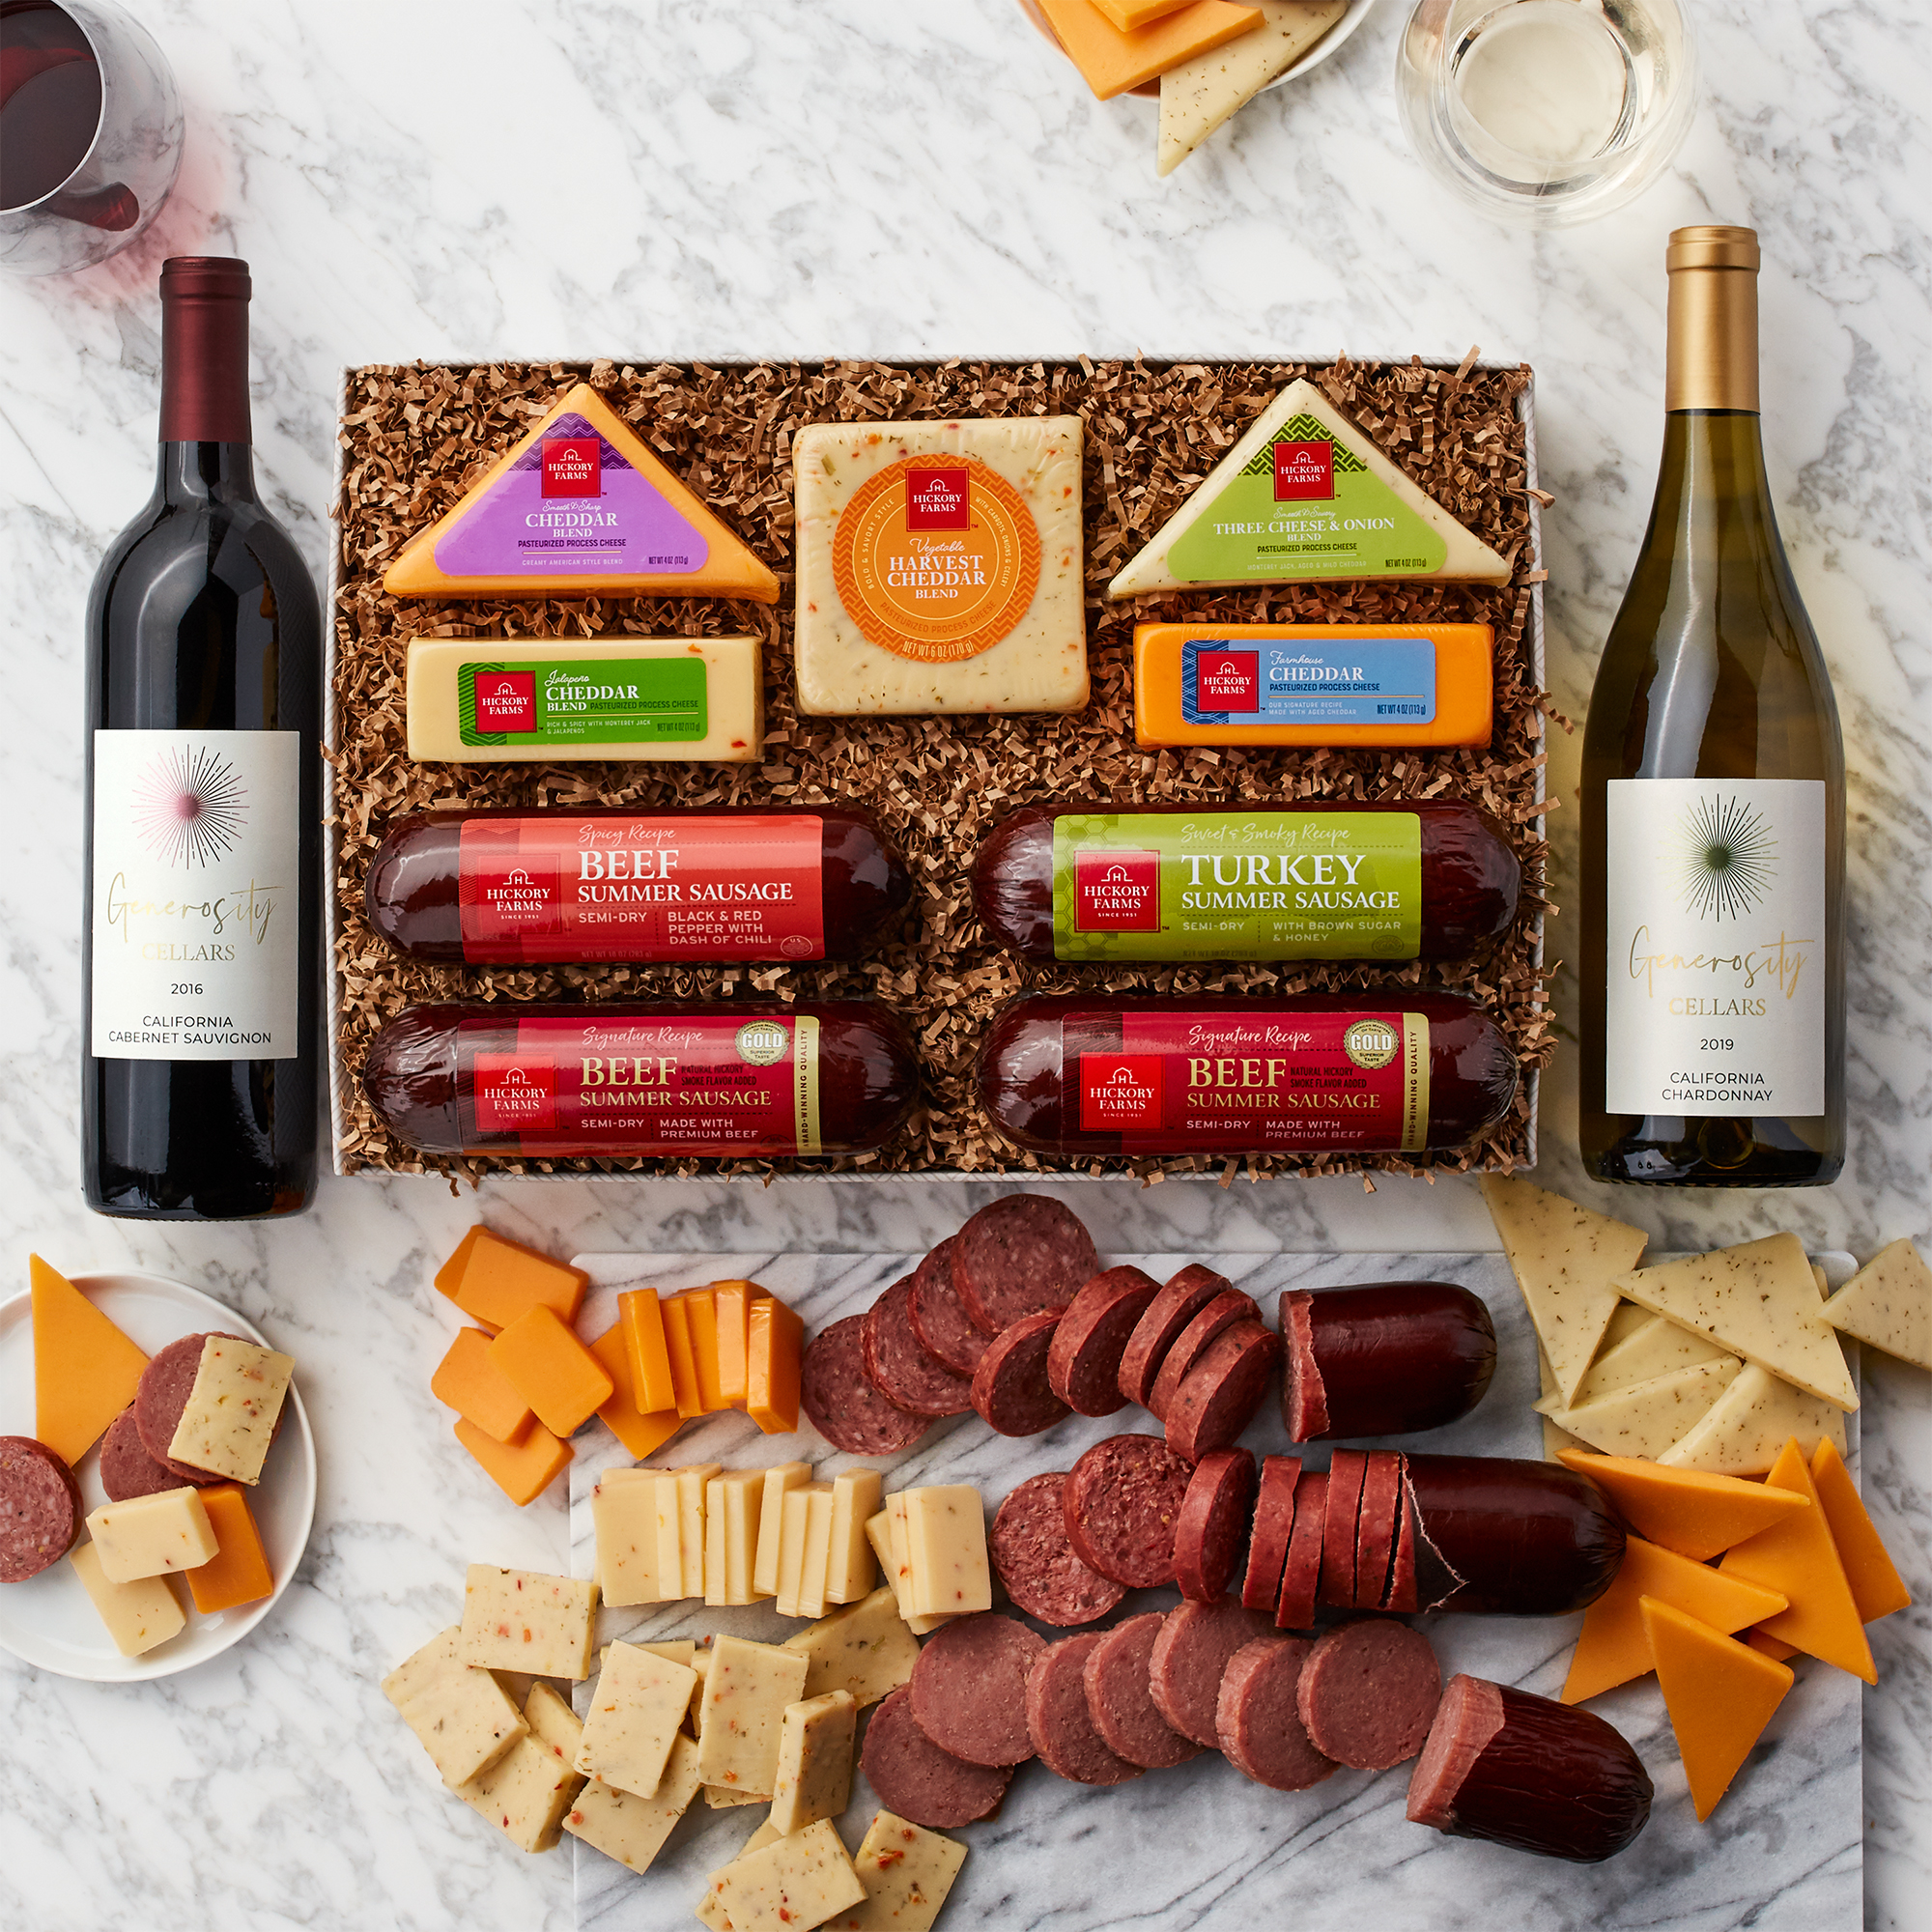 Blue Cheese and Port Gift Box – The Cheese Shop